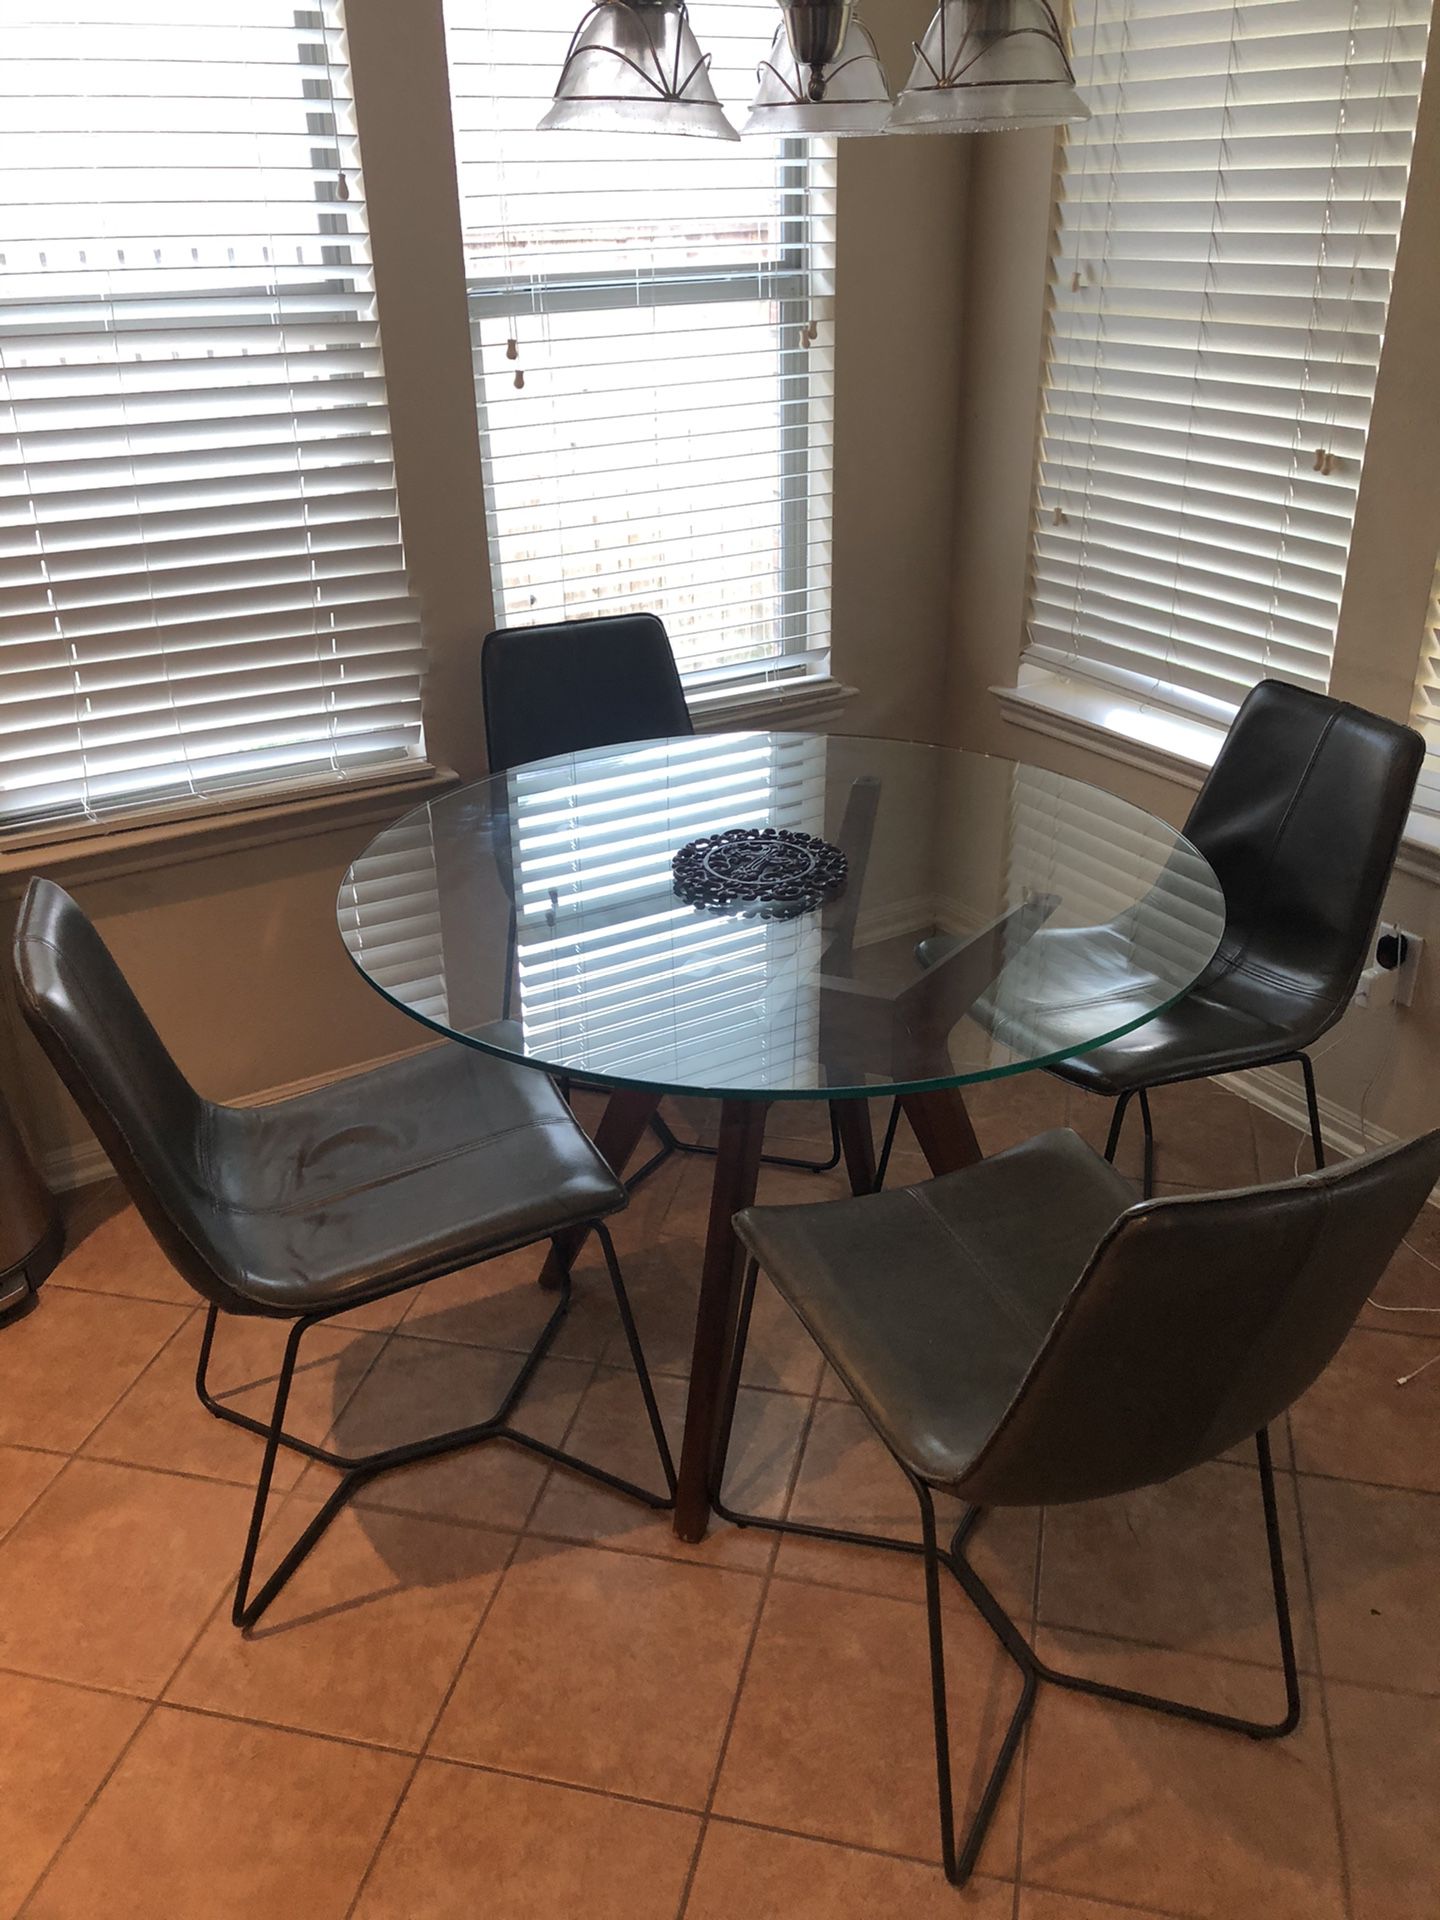 Glass dinette table and 4 chairs from West Elm. Selling due to move to new home with a different floor plan.